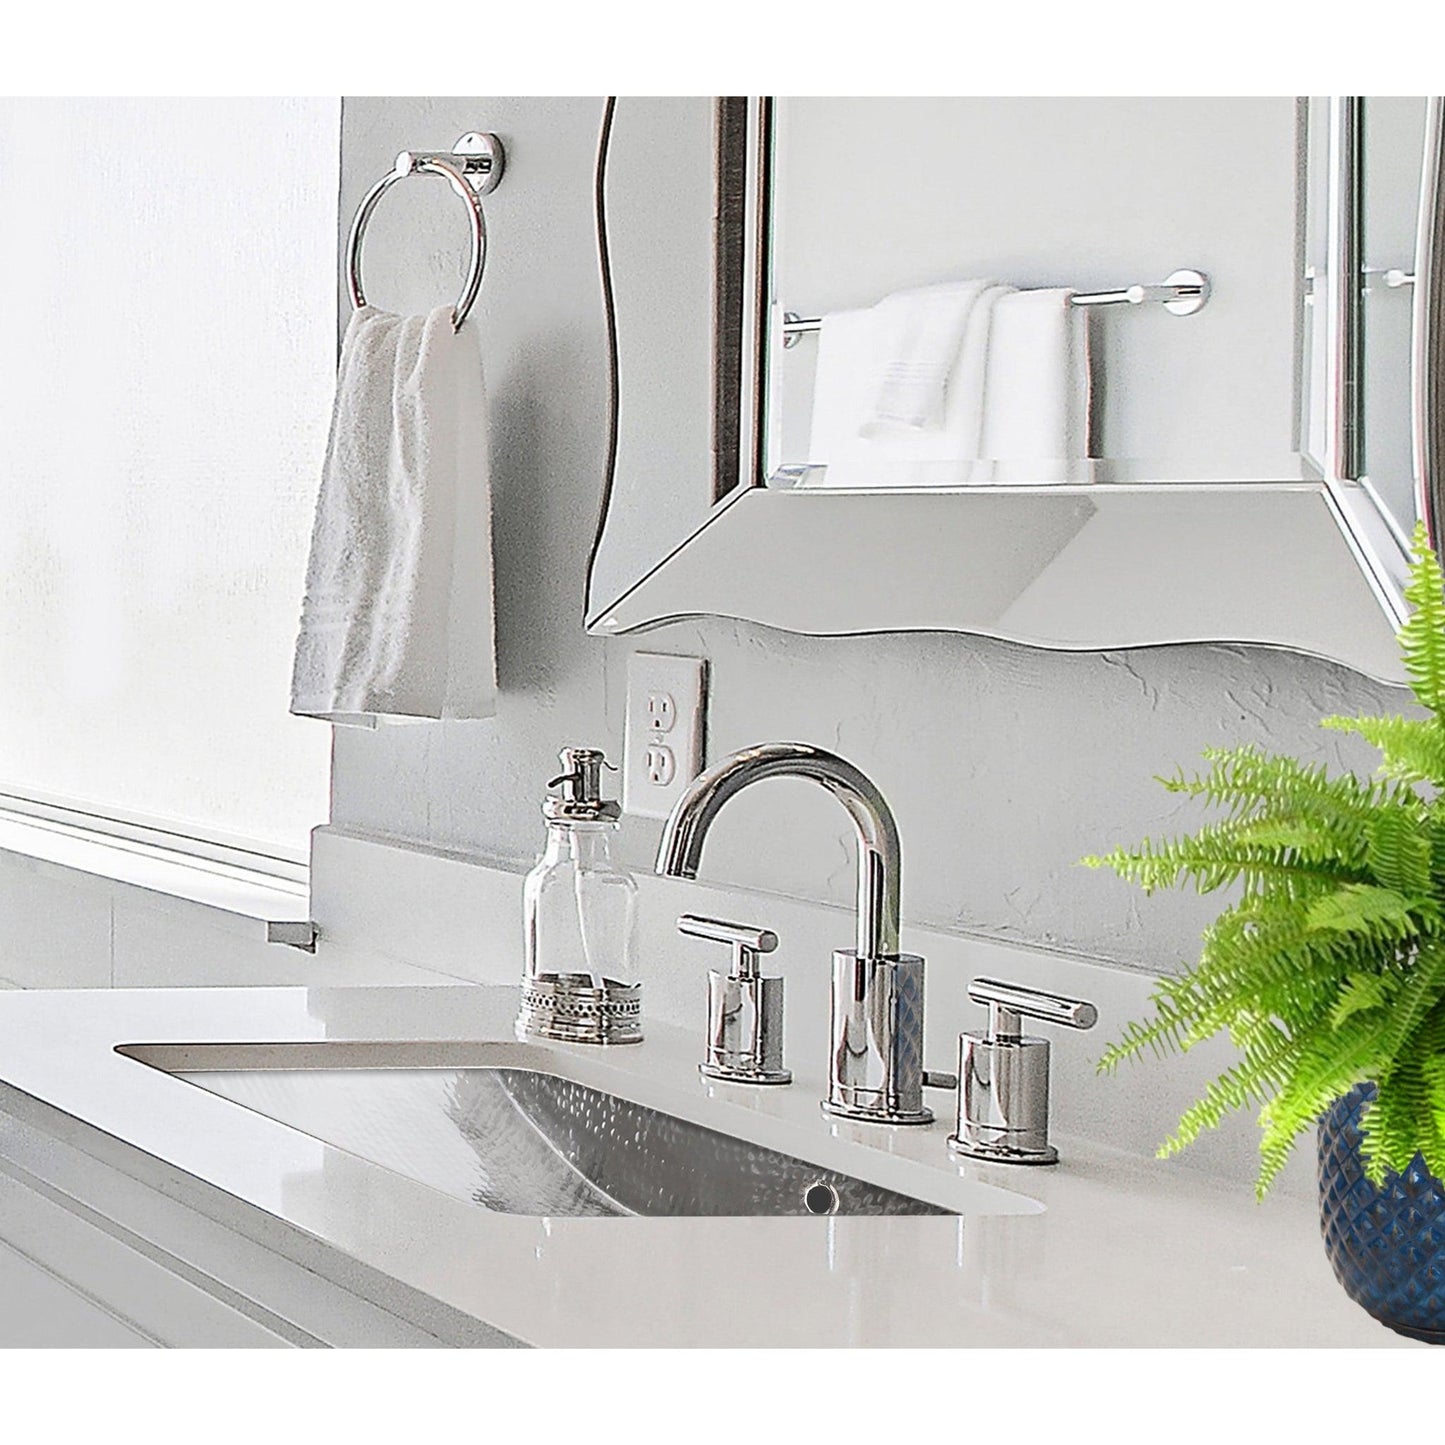 Nantucket Sinks Brightwork Home 21" W x 14" D" Rectangular Hand Hammered Polished Stainless Steel Undermount Sink With Overflow